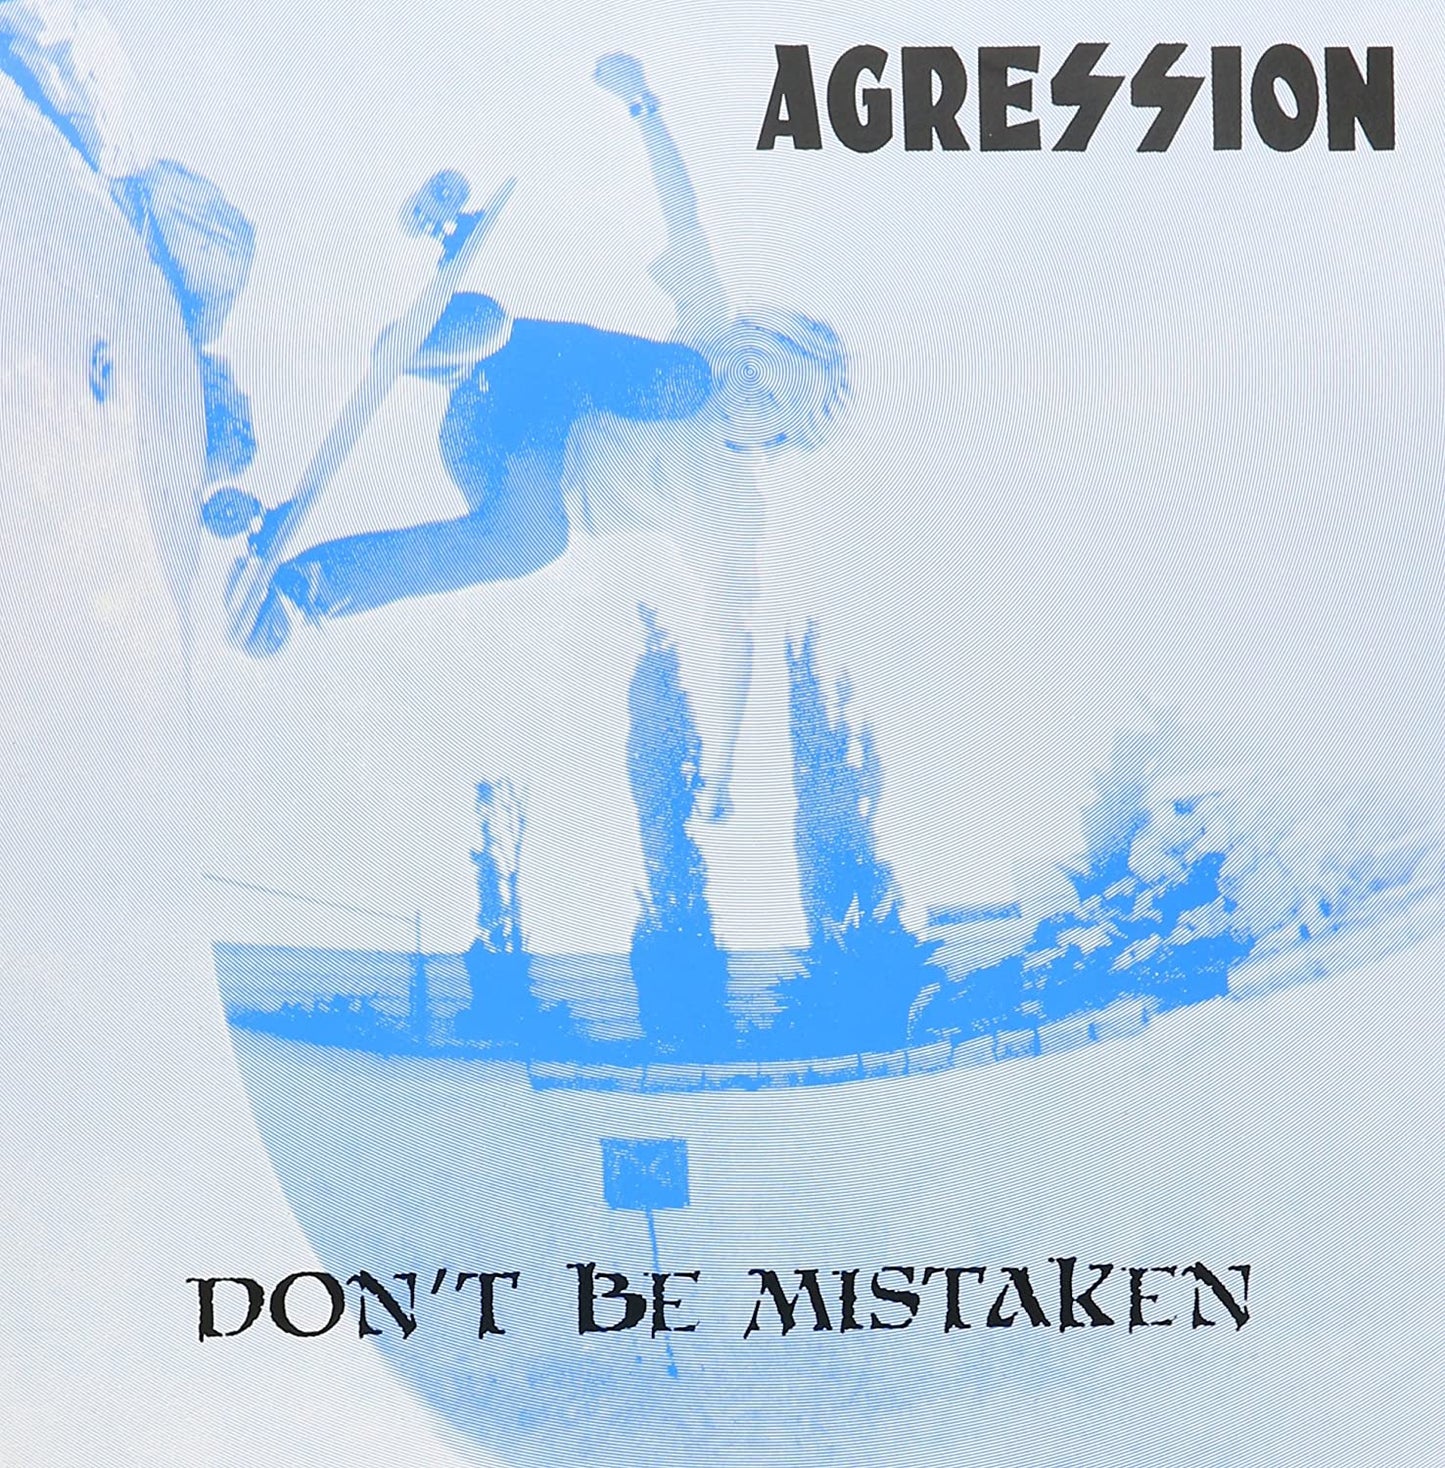 Agression "Don't Be Mistaken" CD